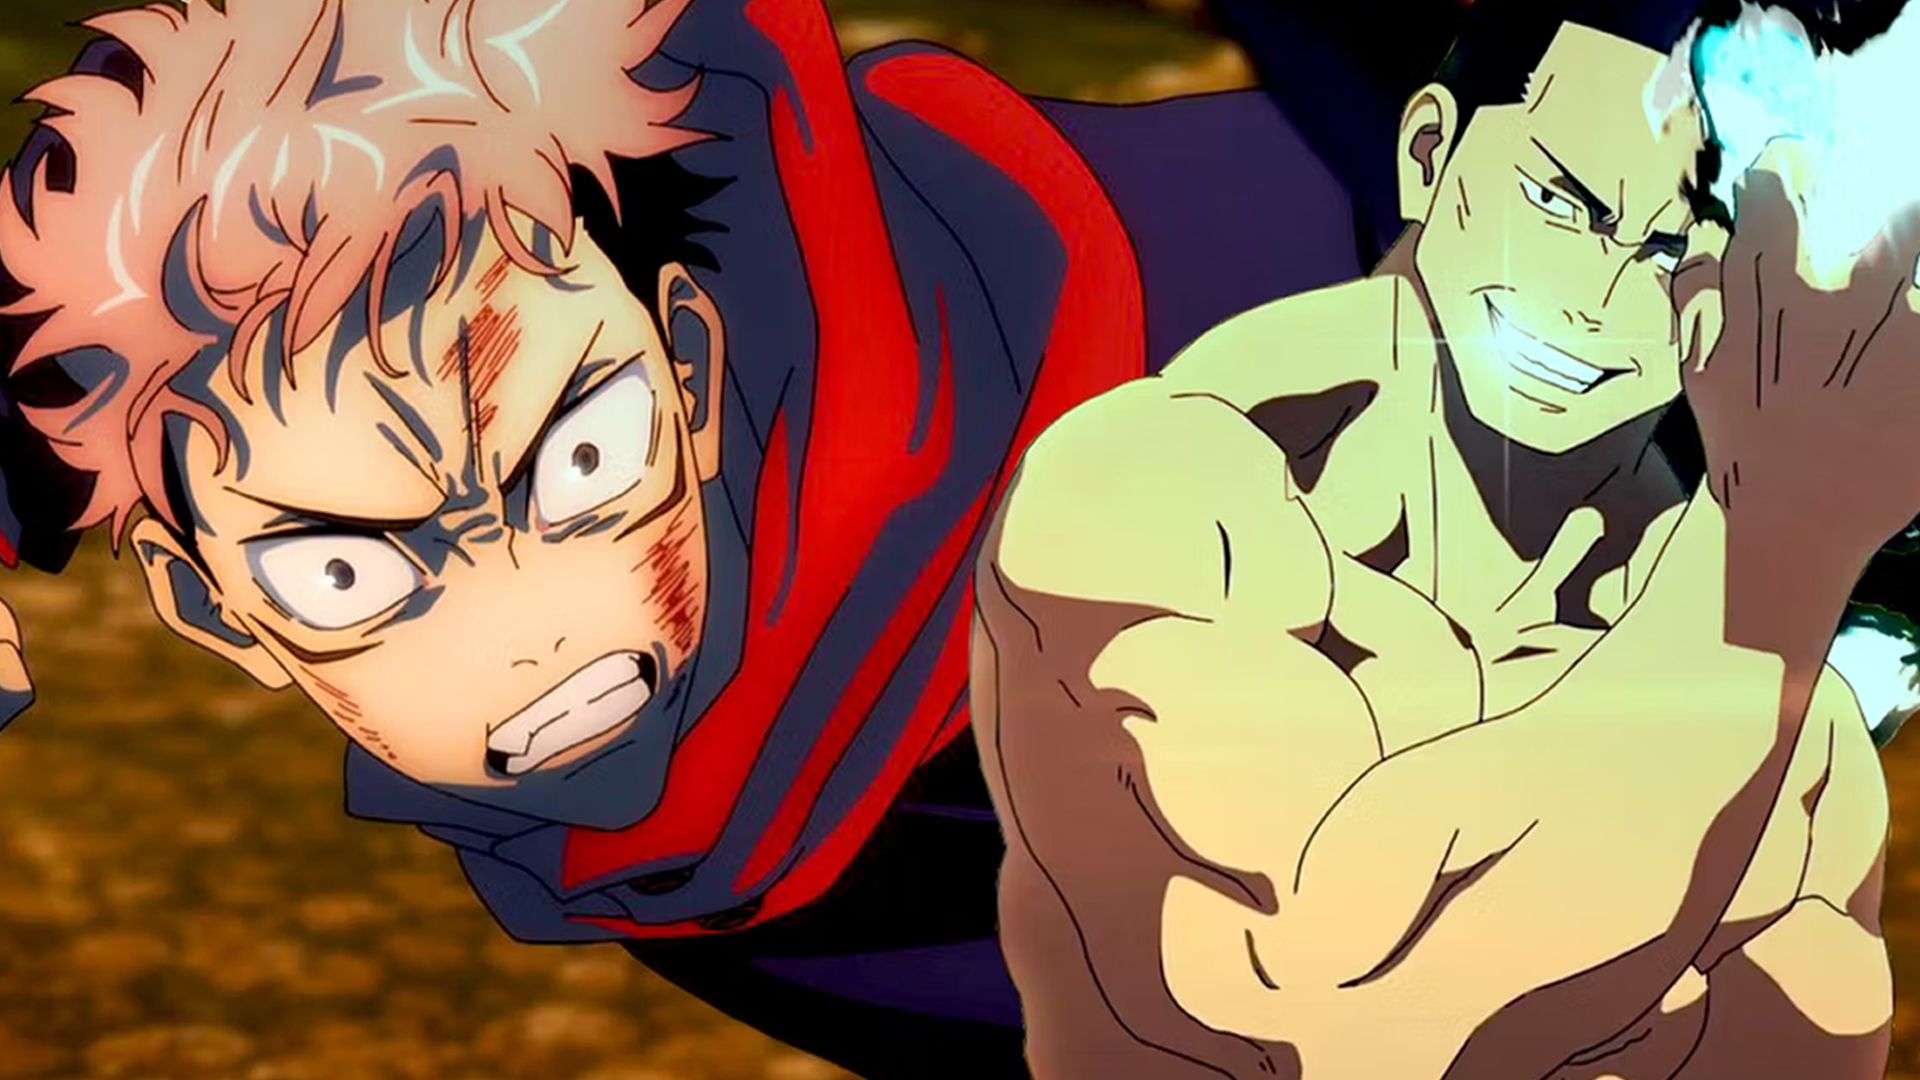 Jujutsu Kaisen & 10 Other Popular Anime With Characters Voiced By